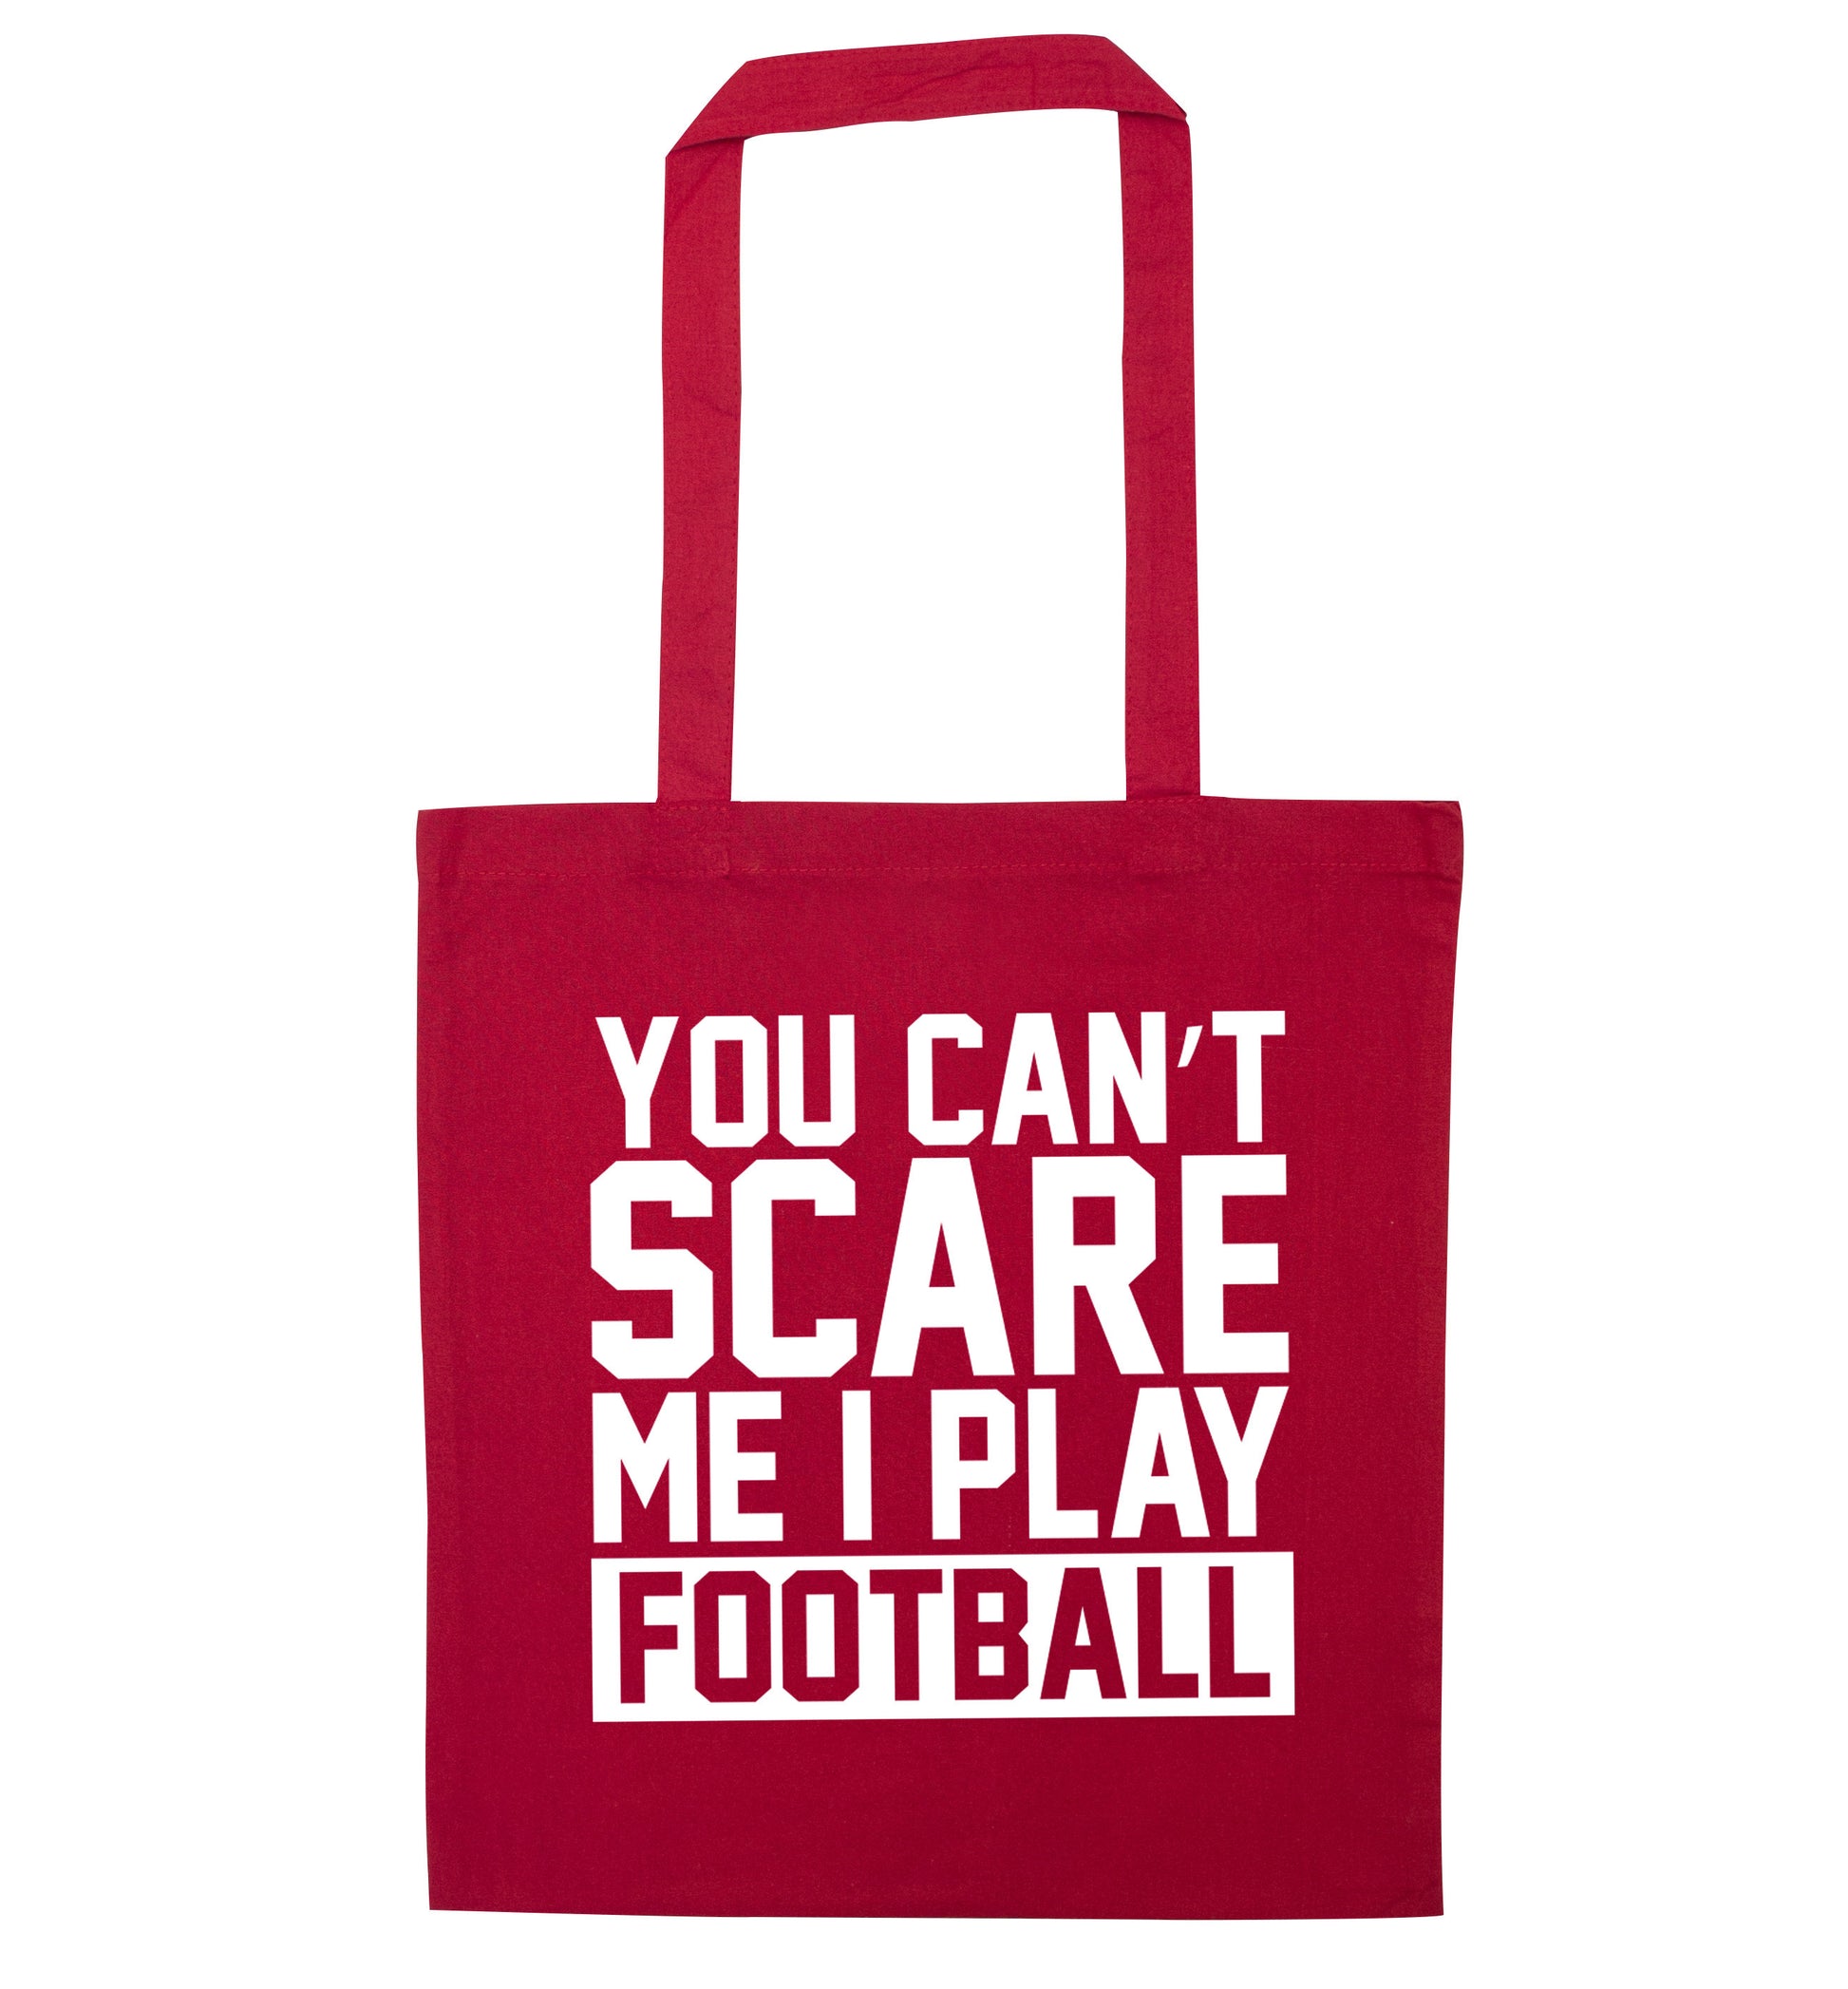 You can't scare me I play football red tote bag